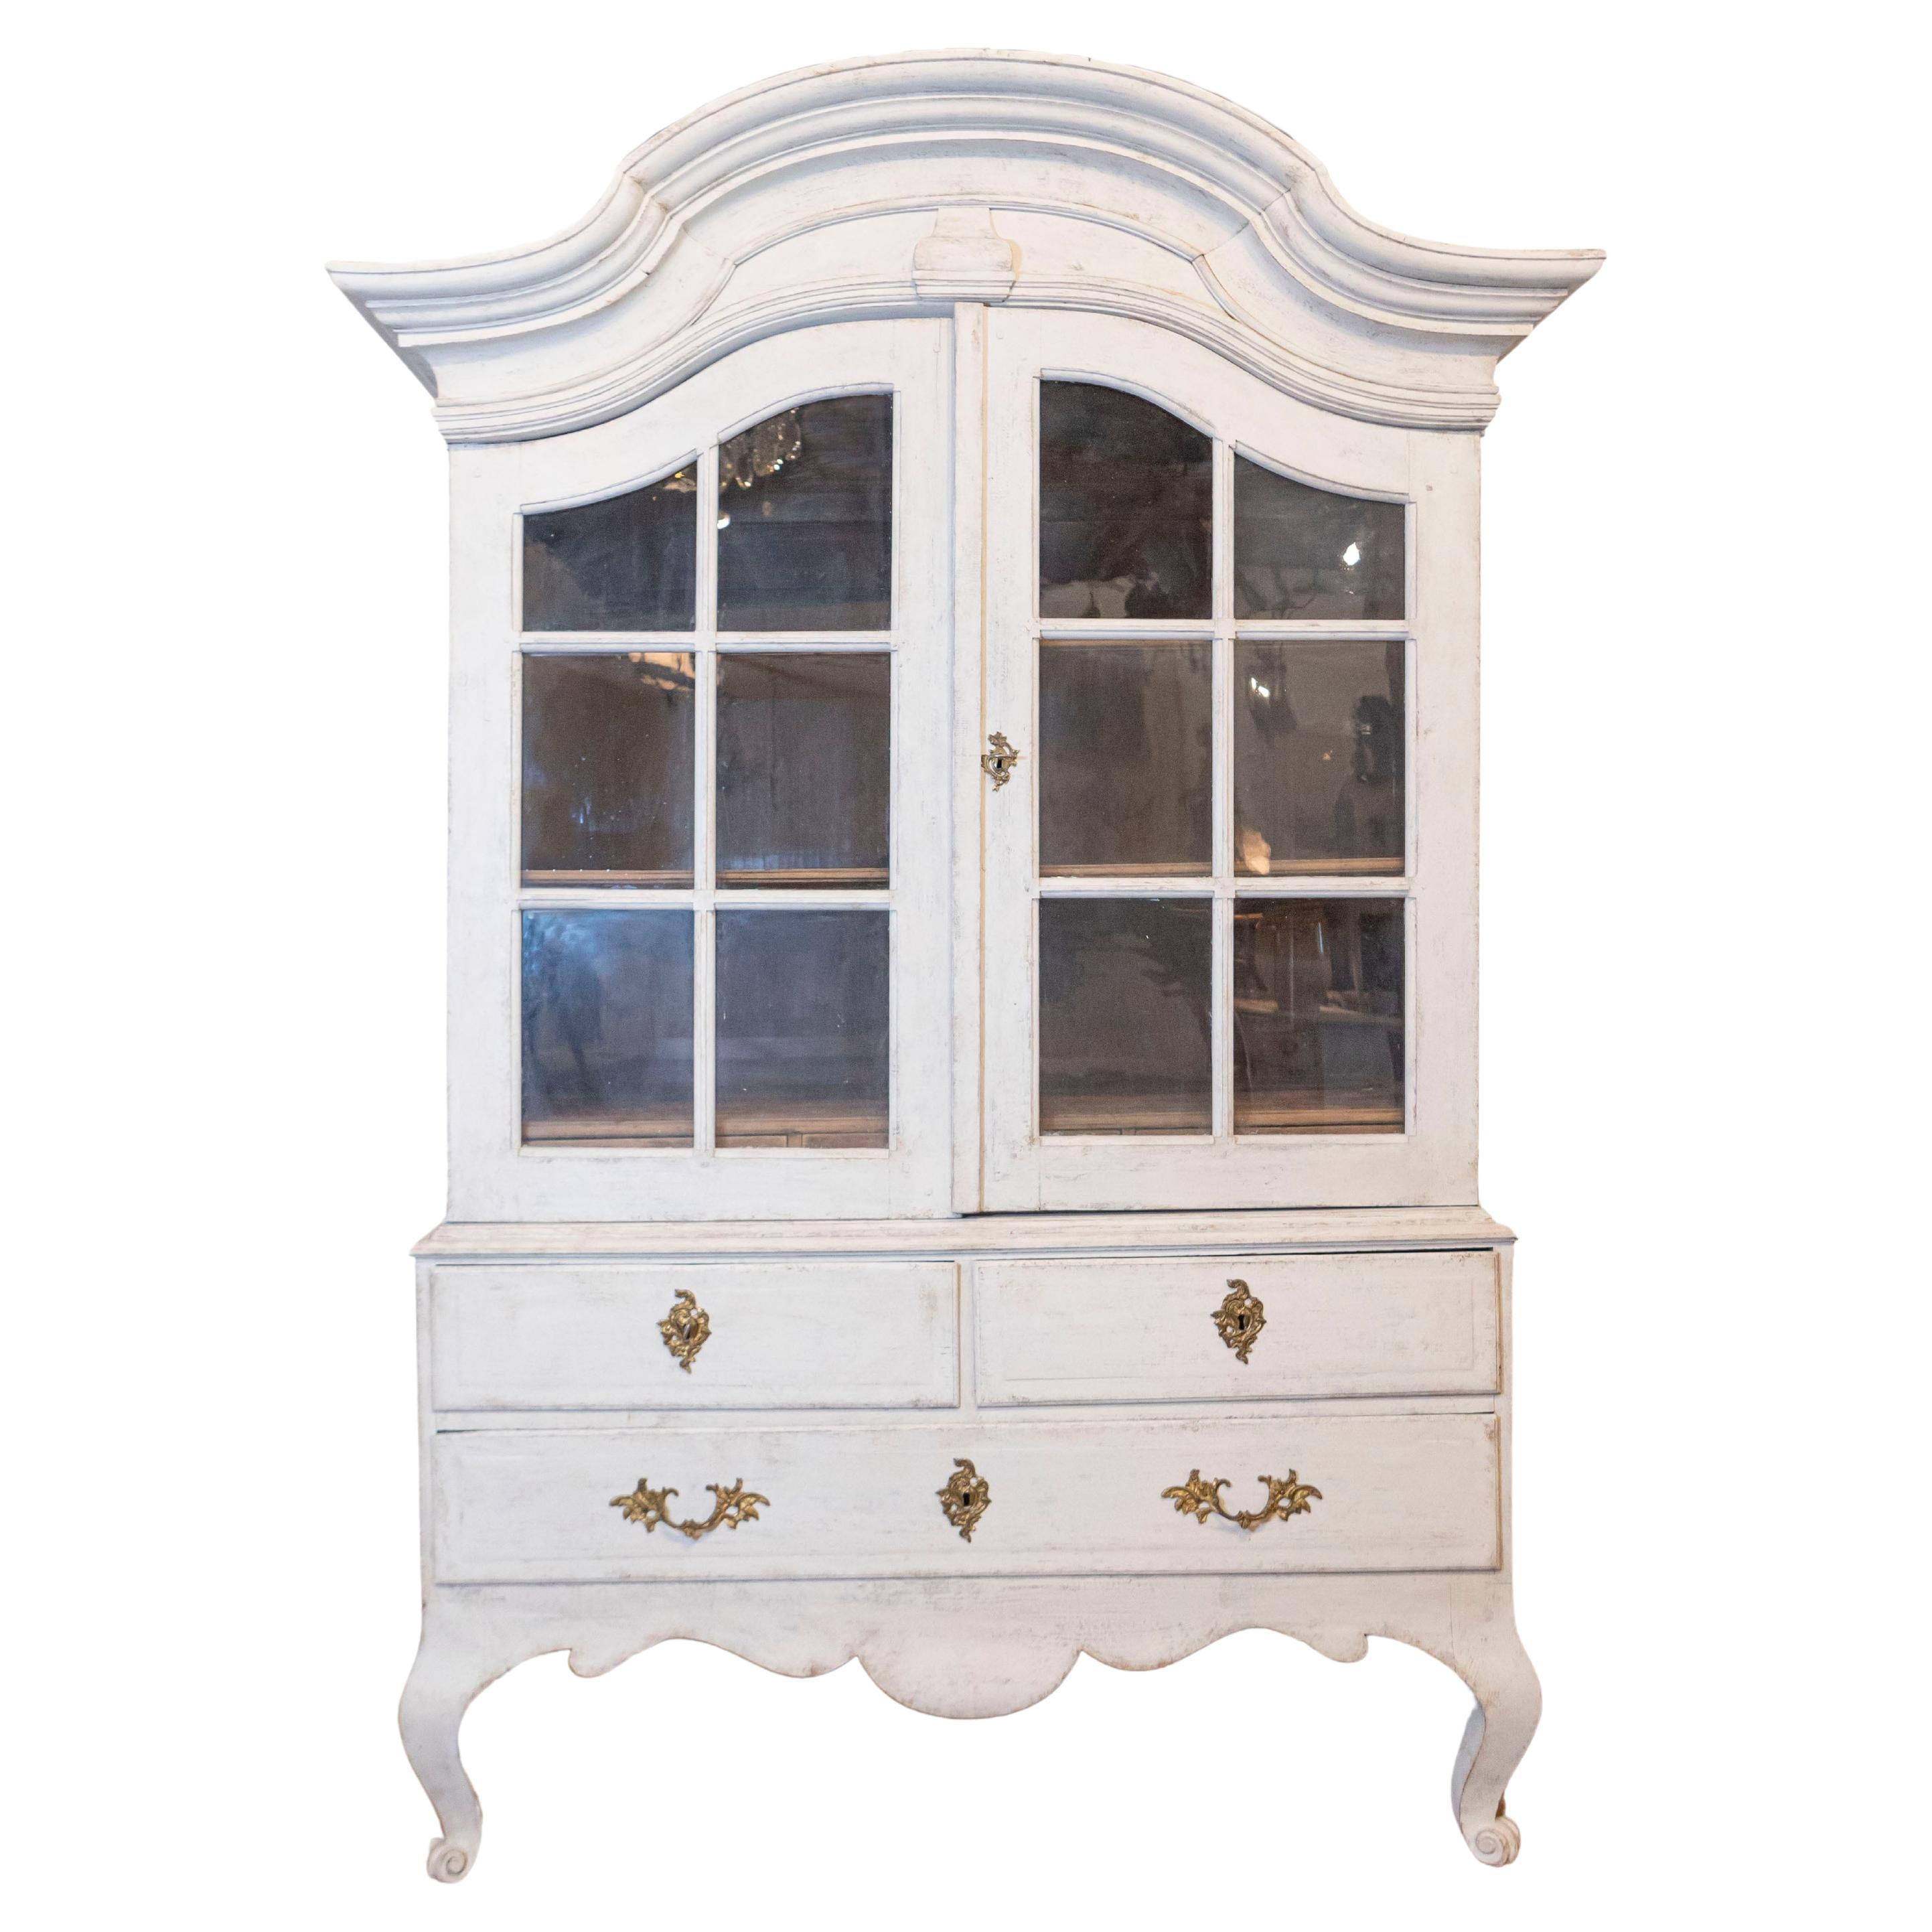 1760s Period Rococo Swedish Cabinet with Glass Doors, Bonnet Top and Cabrioles For Sale